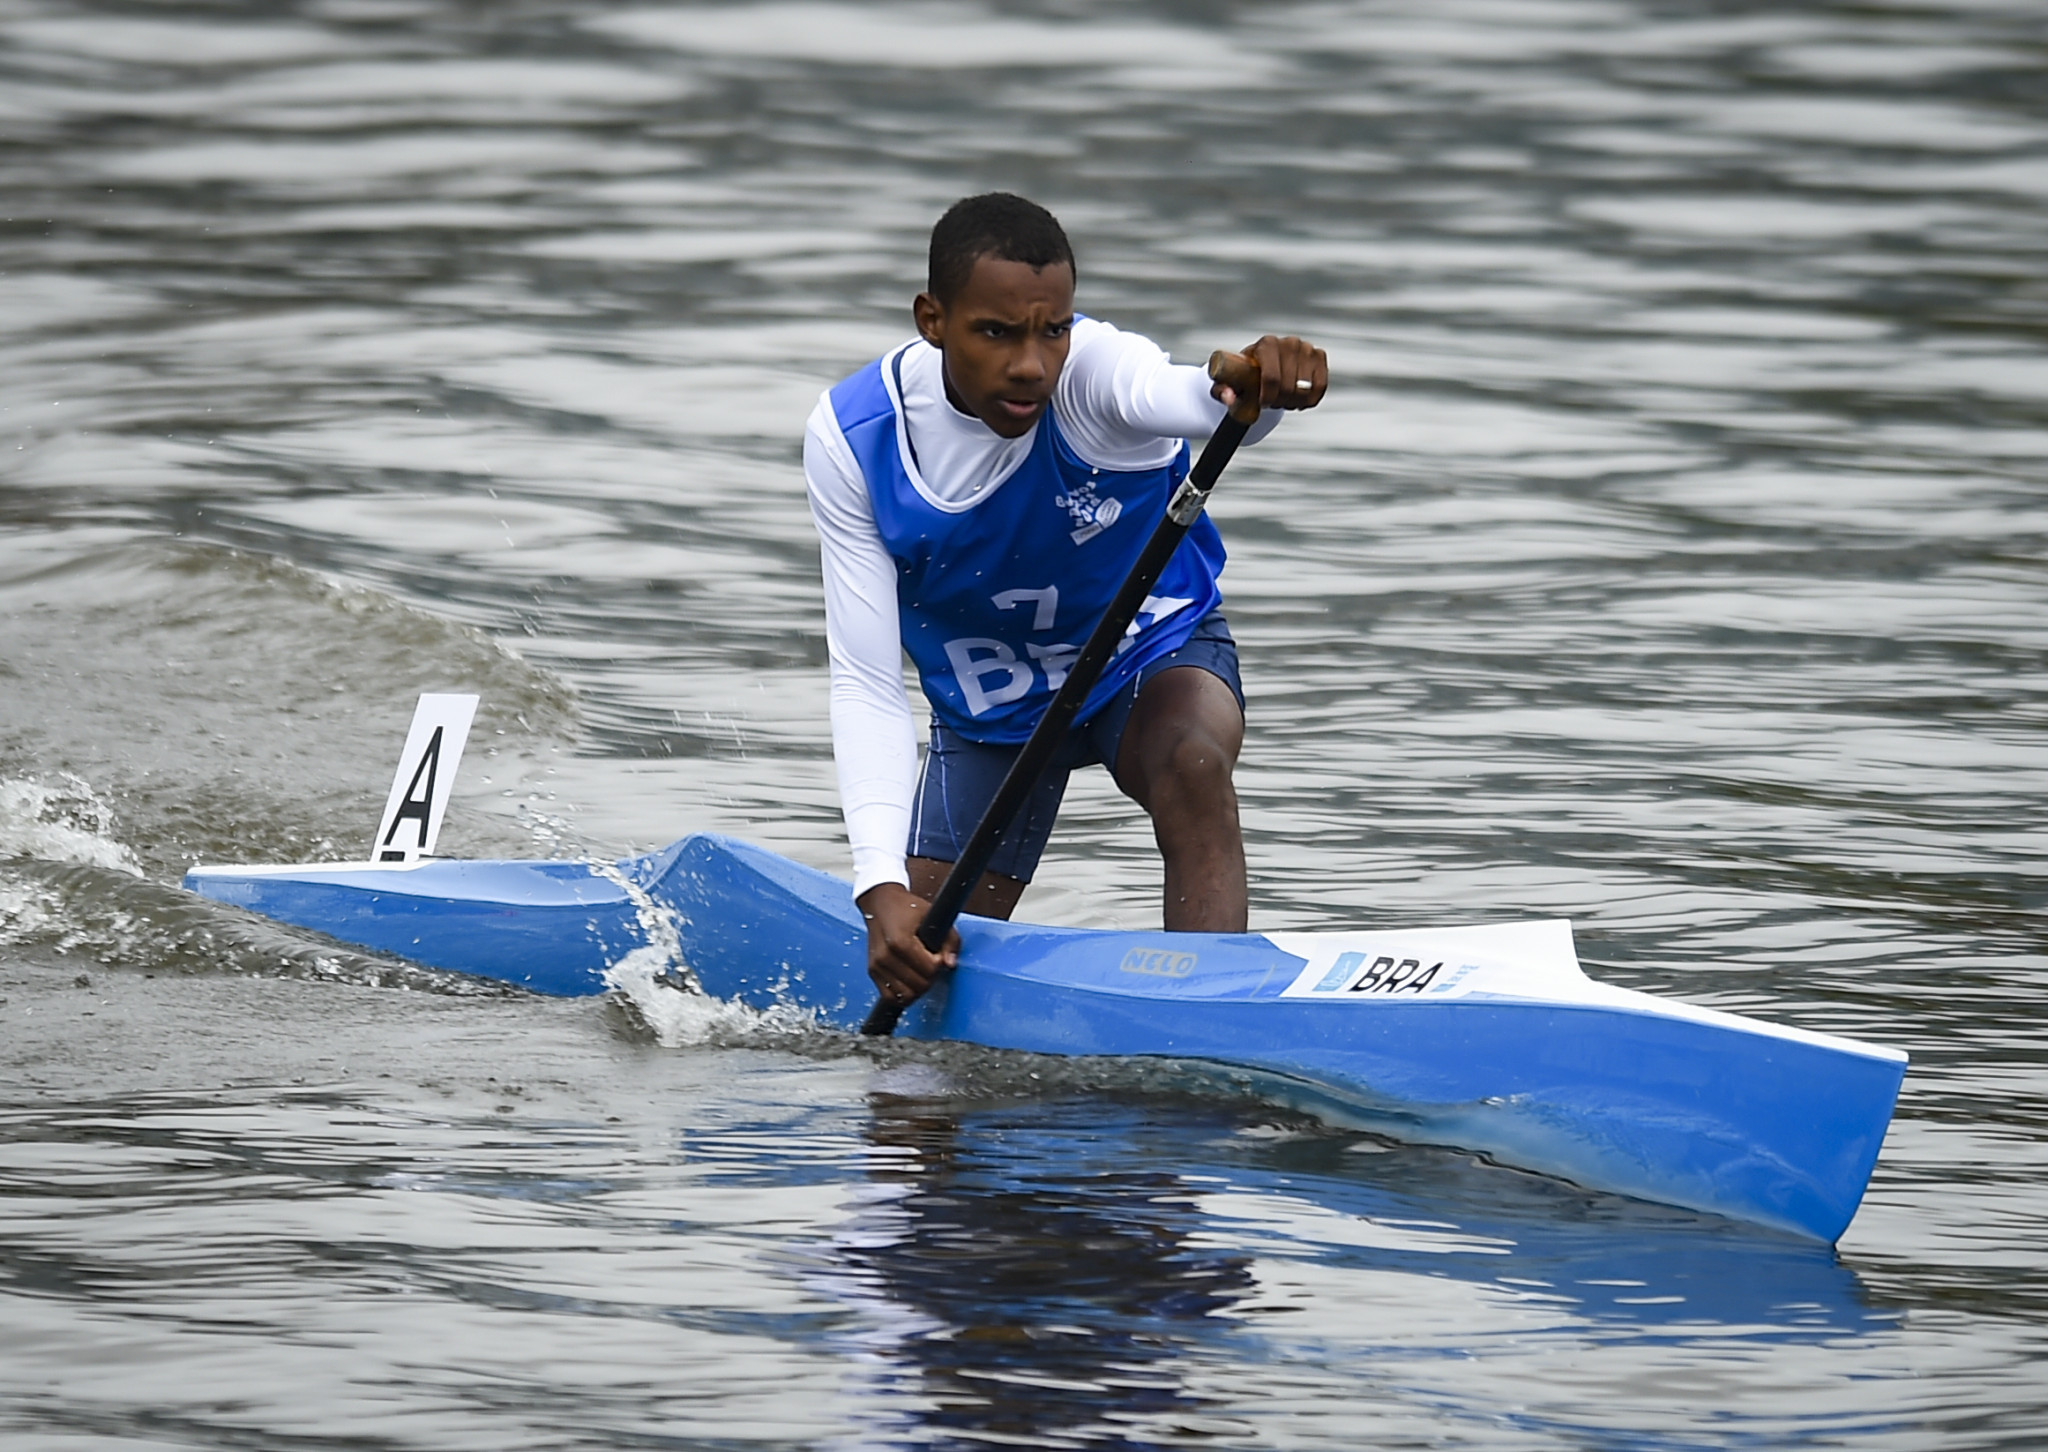 Head-to-head kayak finals were held for both men and women at the urban cluster of venues ©Getty Images